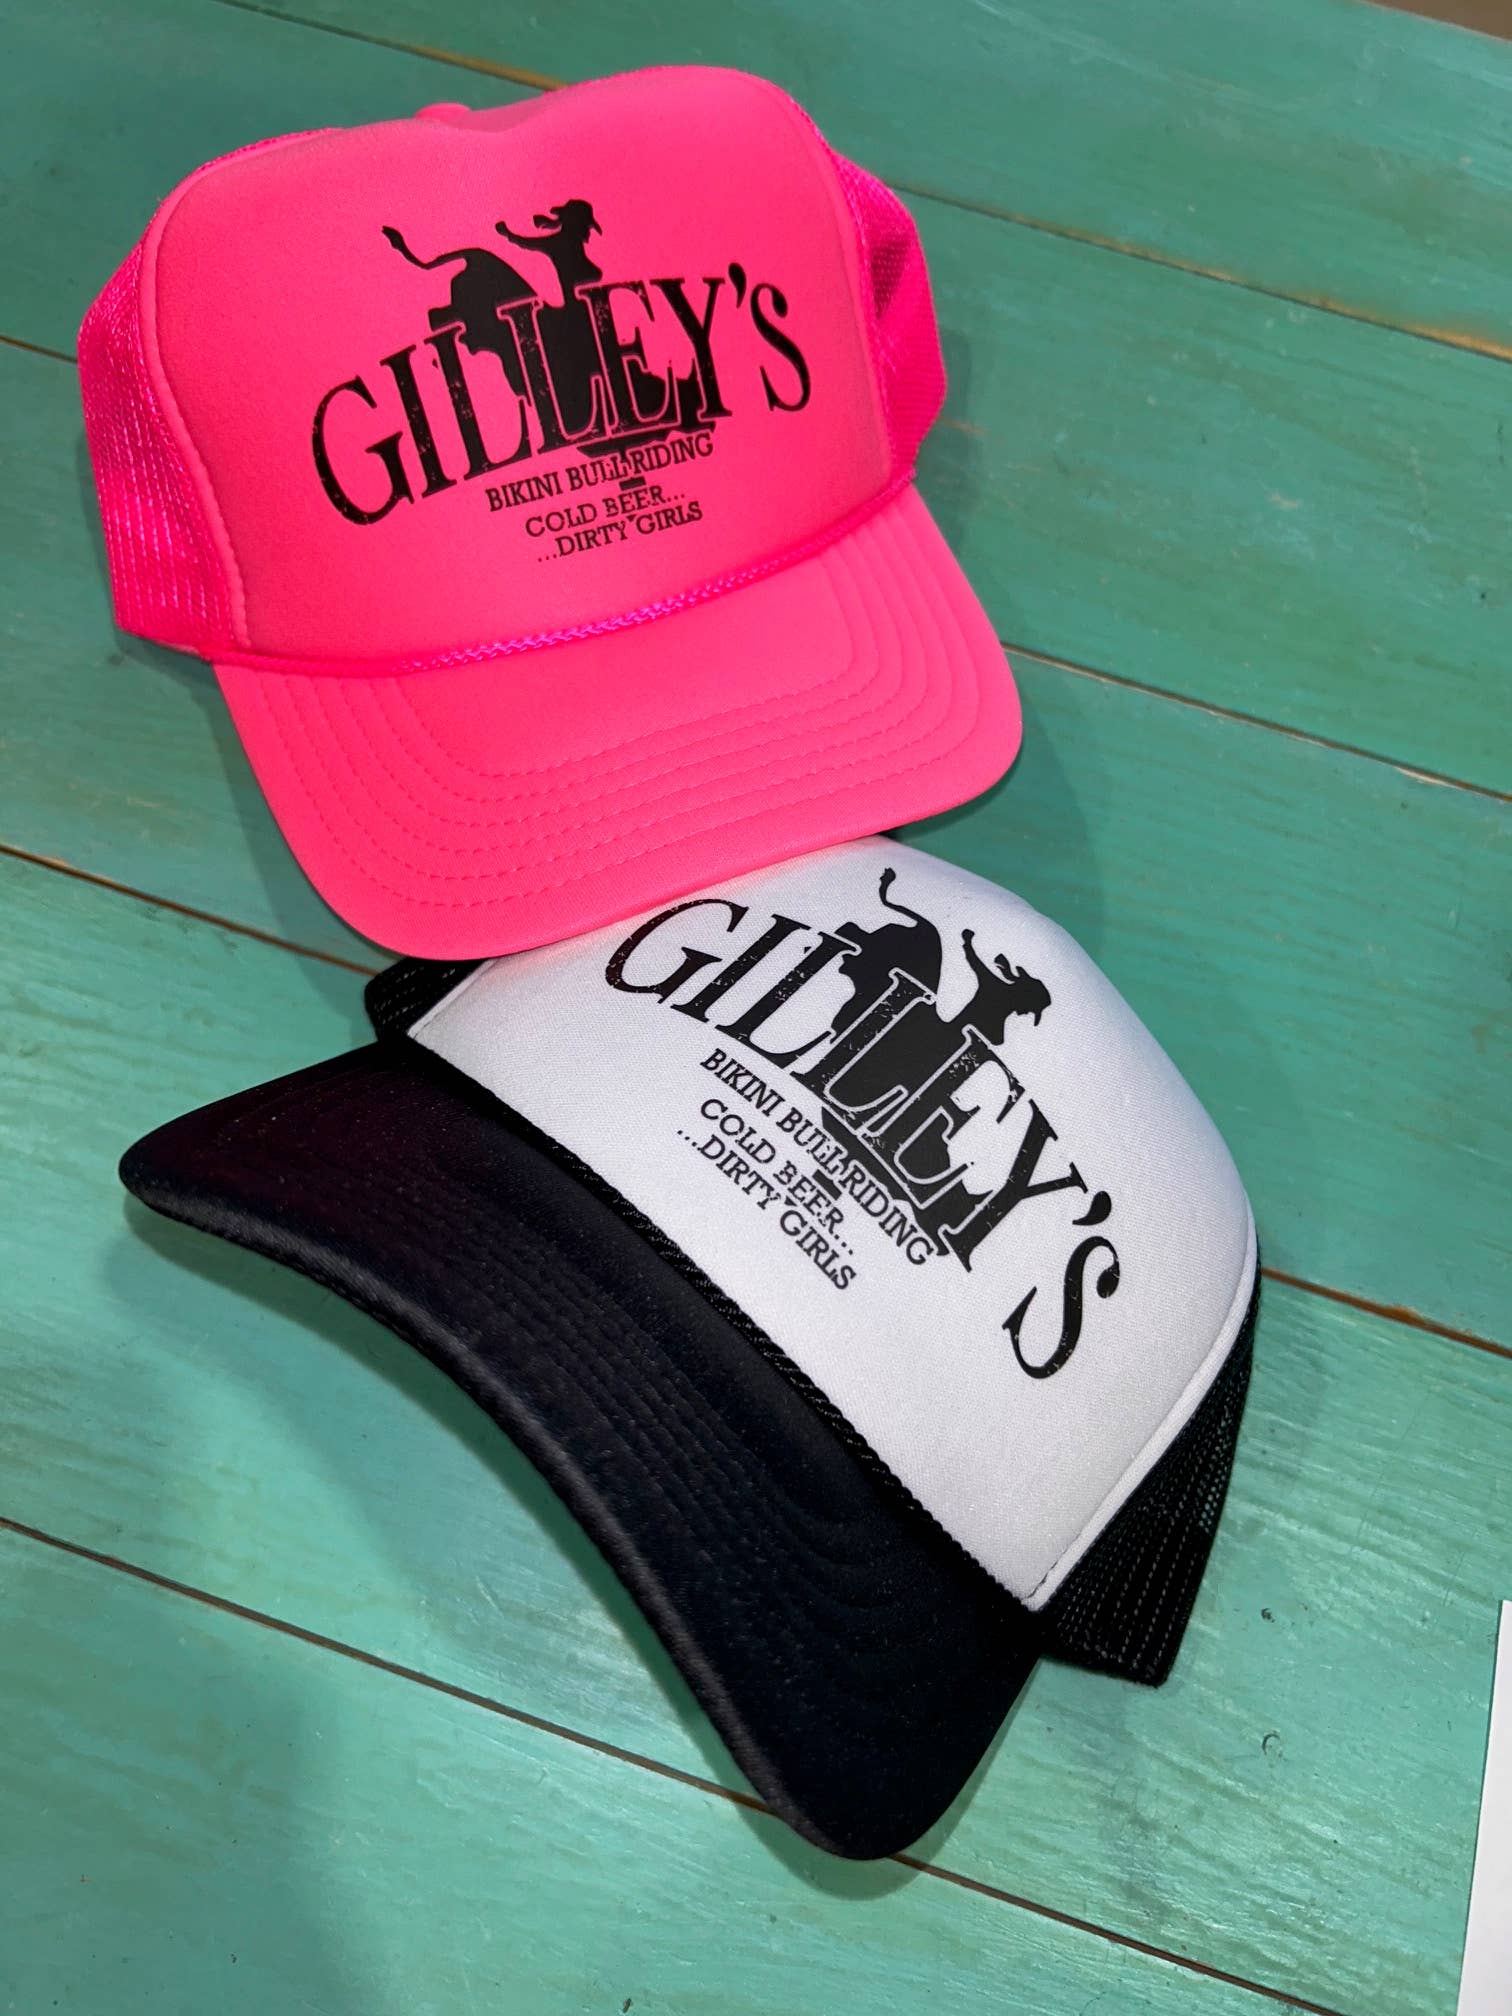 Wholesale Gilley's Bikini Bull Riding Trucker Hat for your store